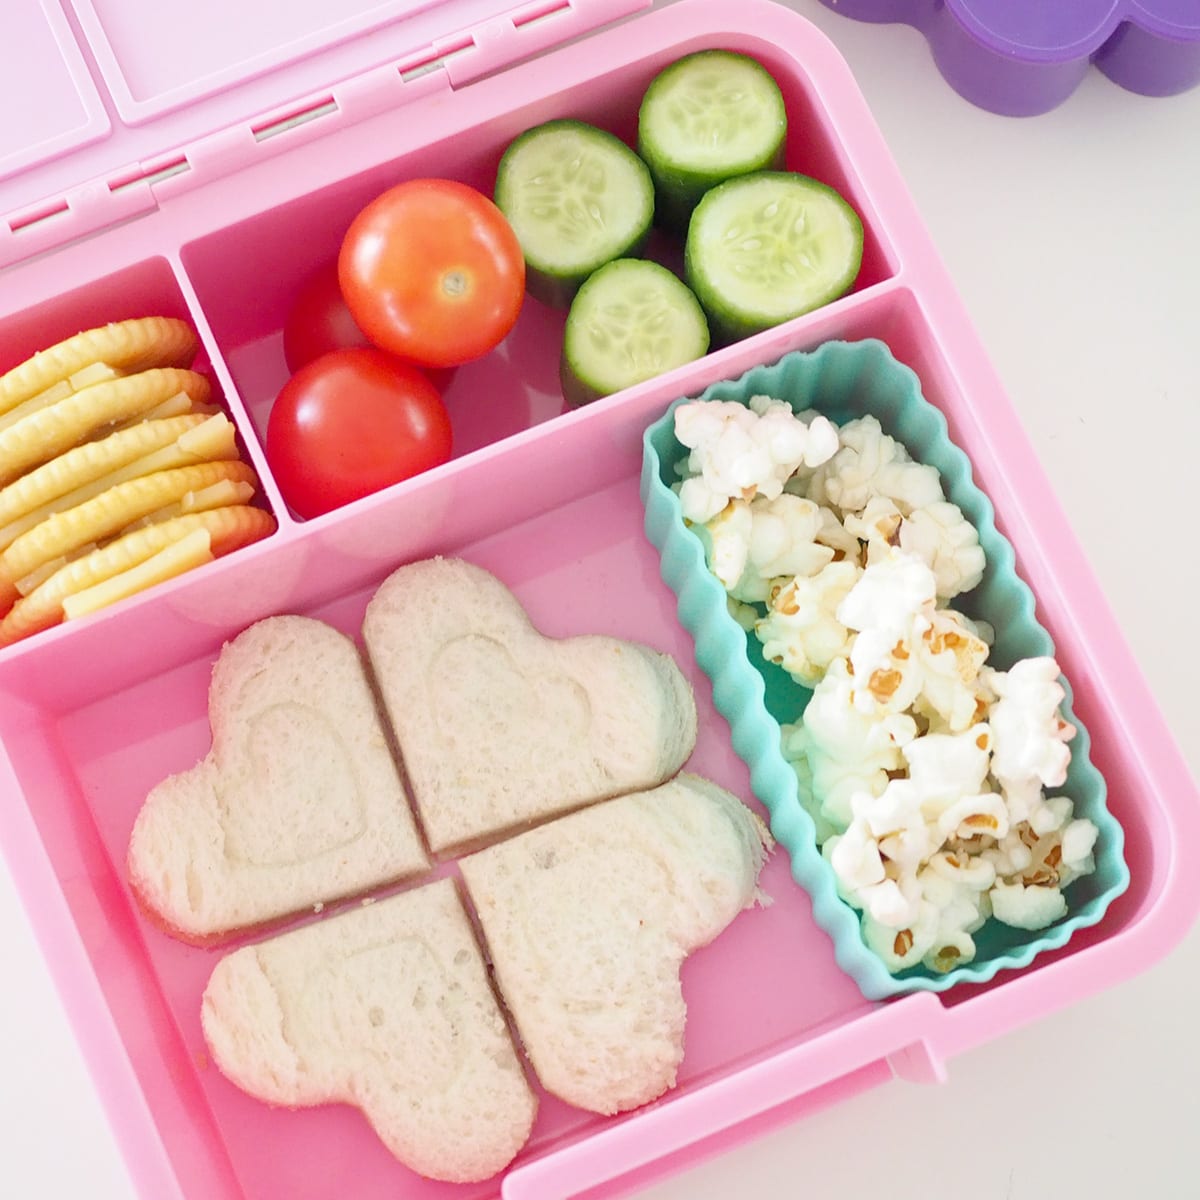 https://theorganisedhousewife.com.au/wp-content/uploads/2020/01/2020-Guide-to-Choosing-the-Best-School-Lunch-Box-For-Kids-Bento-and-Eco-Friendly-Girls-Boys-Lunch-Punch-Sandwich-Cutter.jpg